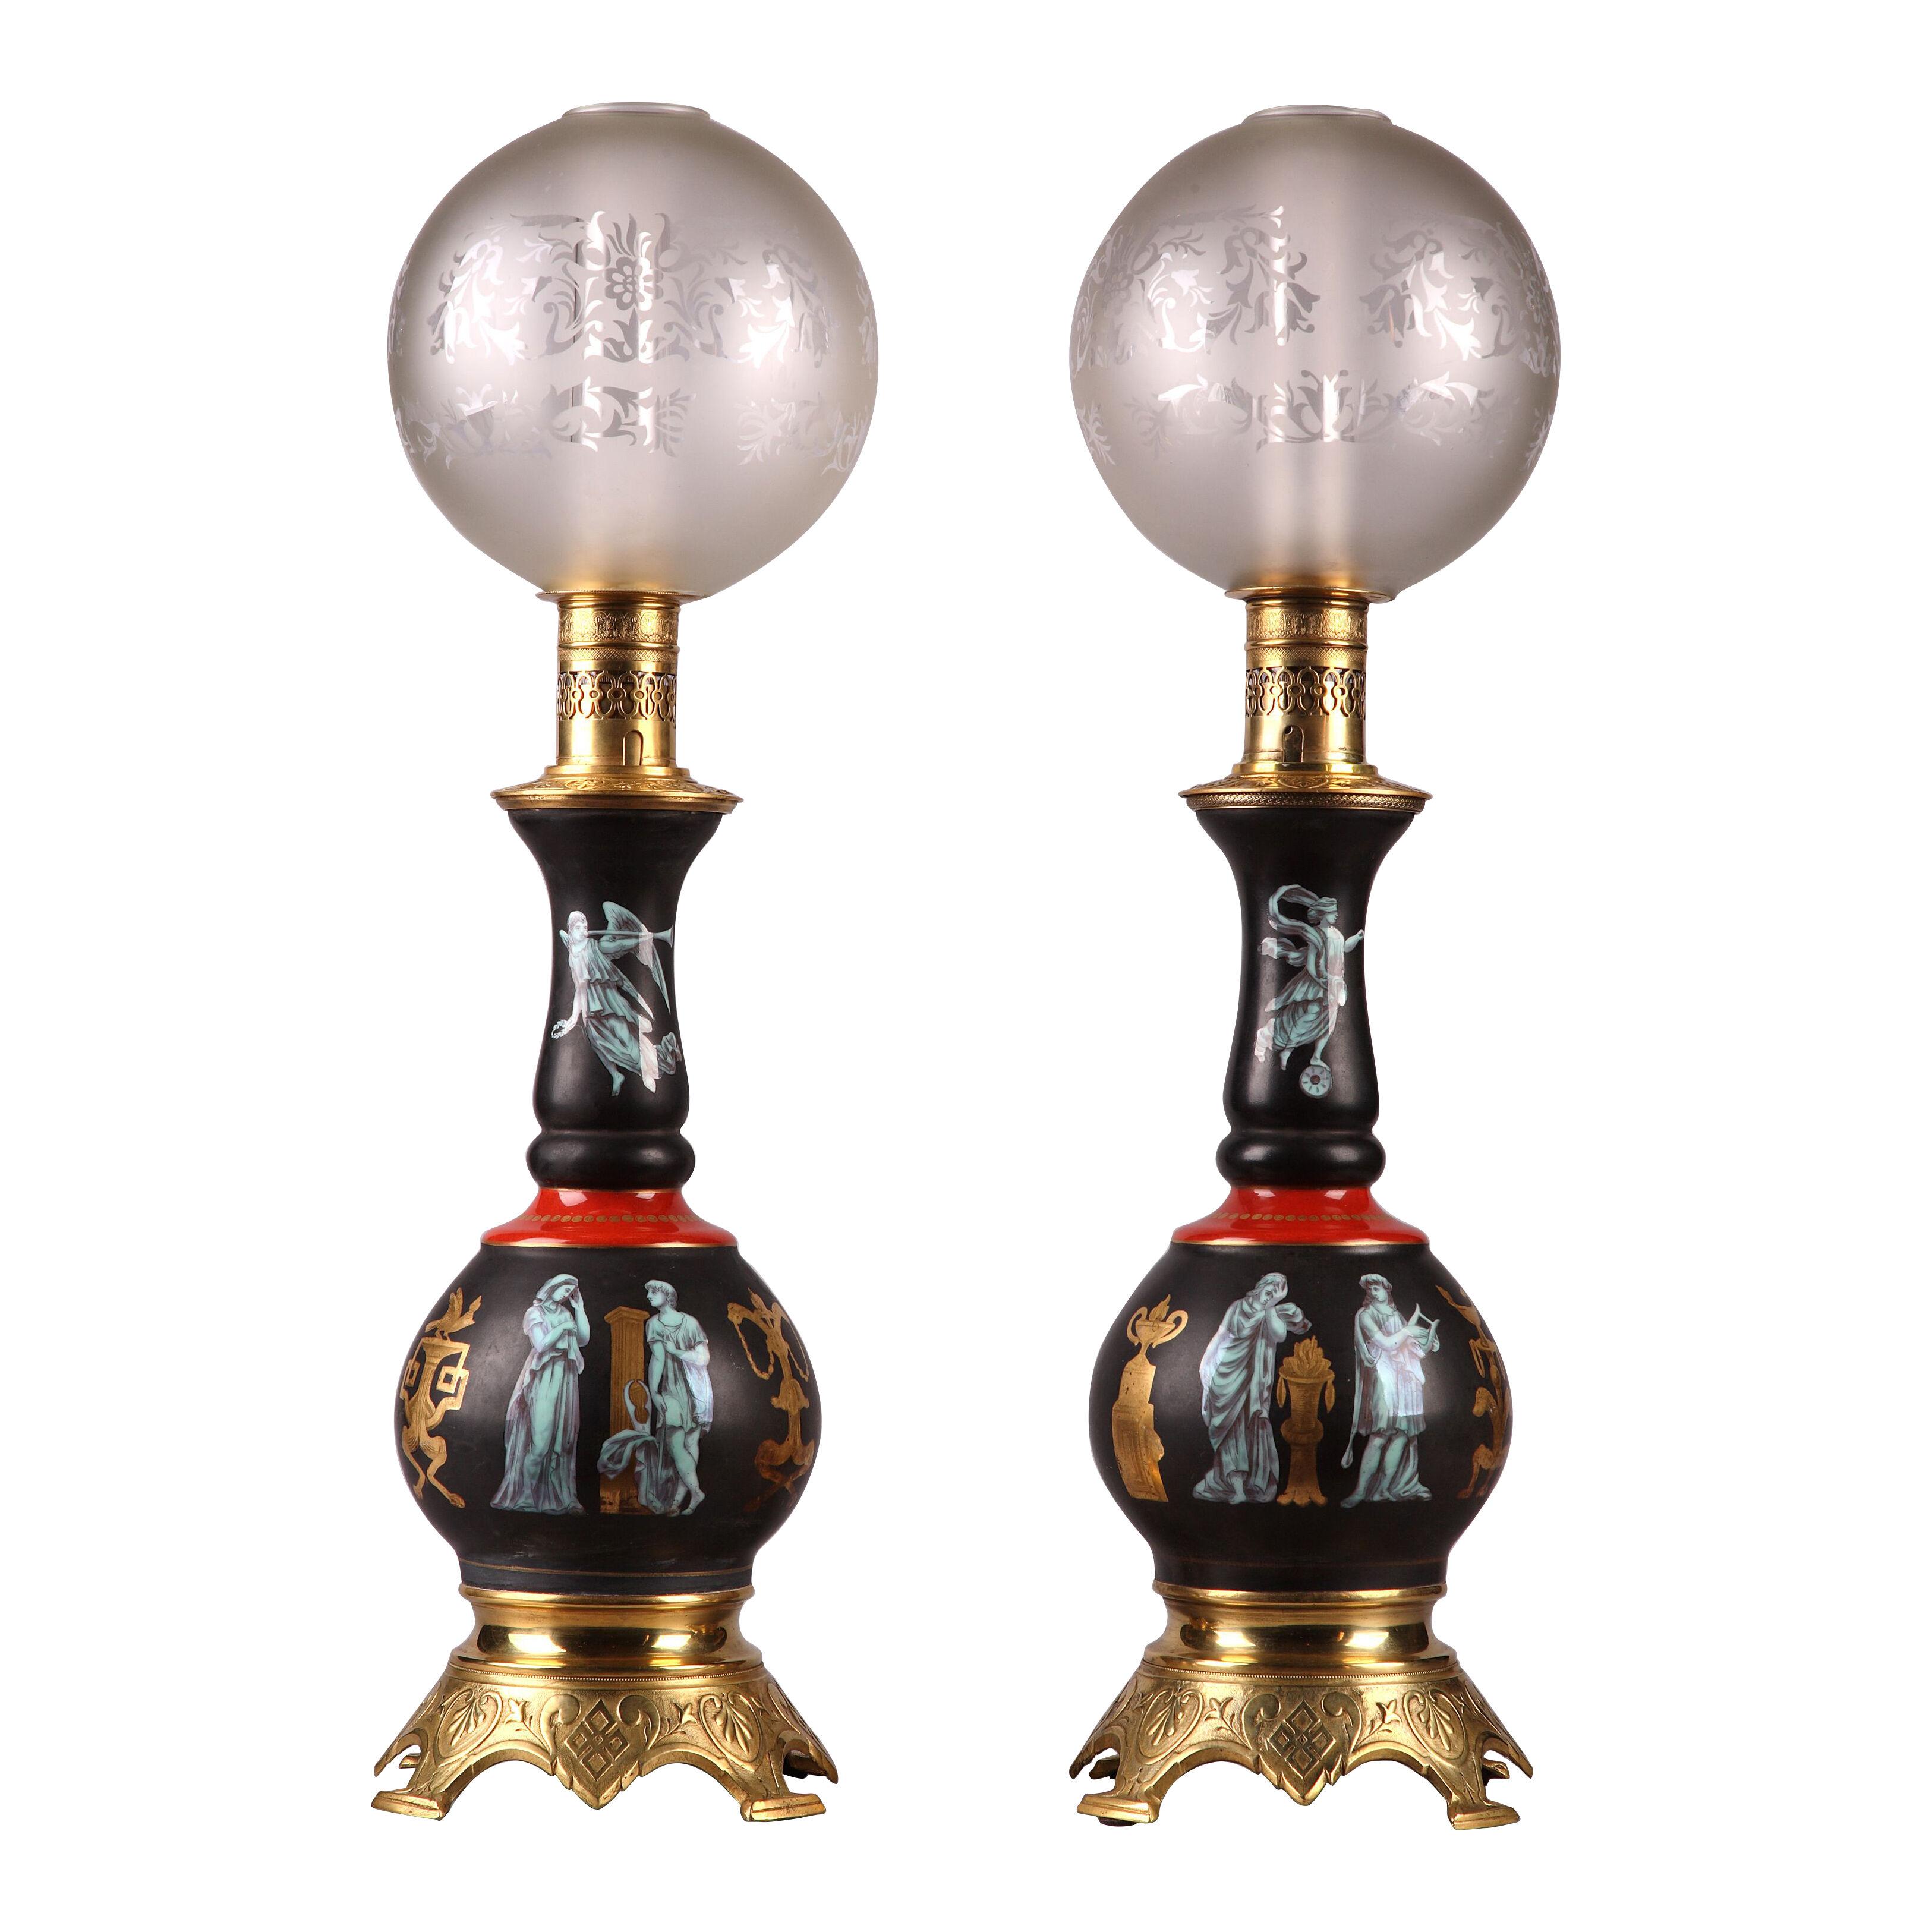 Pair of Pompeian Style Gilded Bronze and Porcelain Lamps, France, Circa 1880